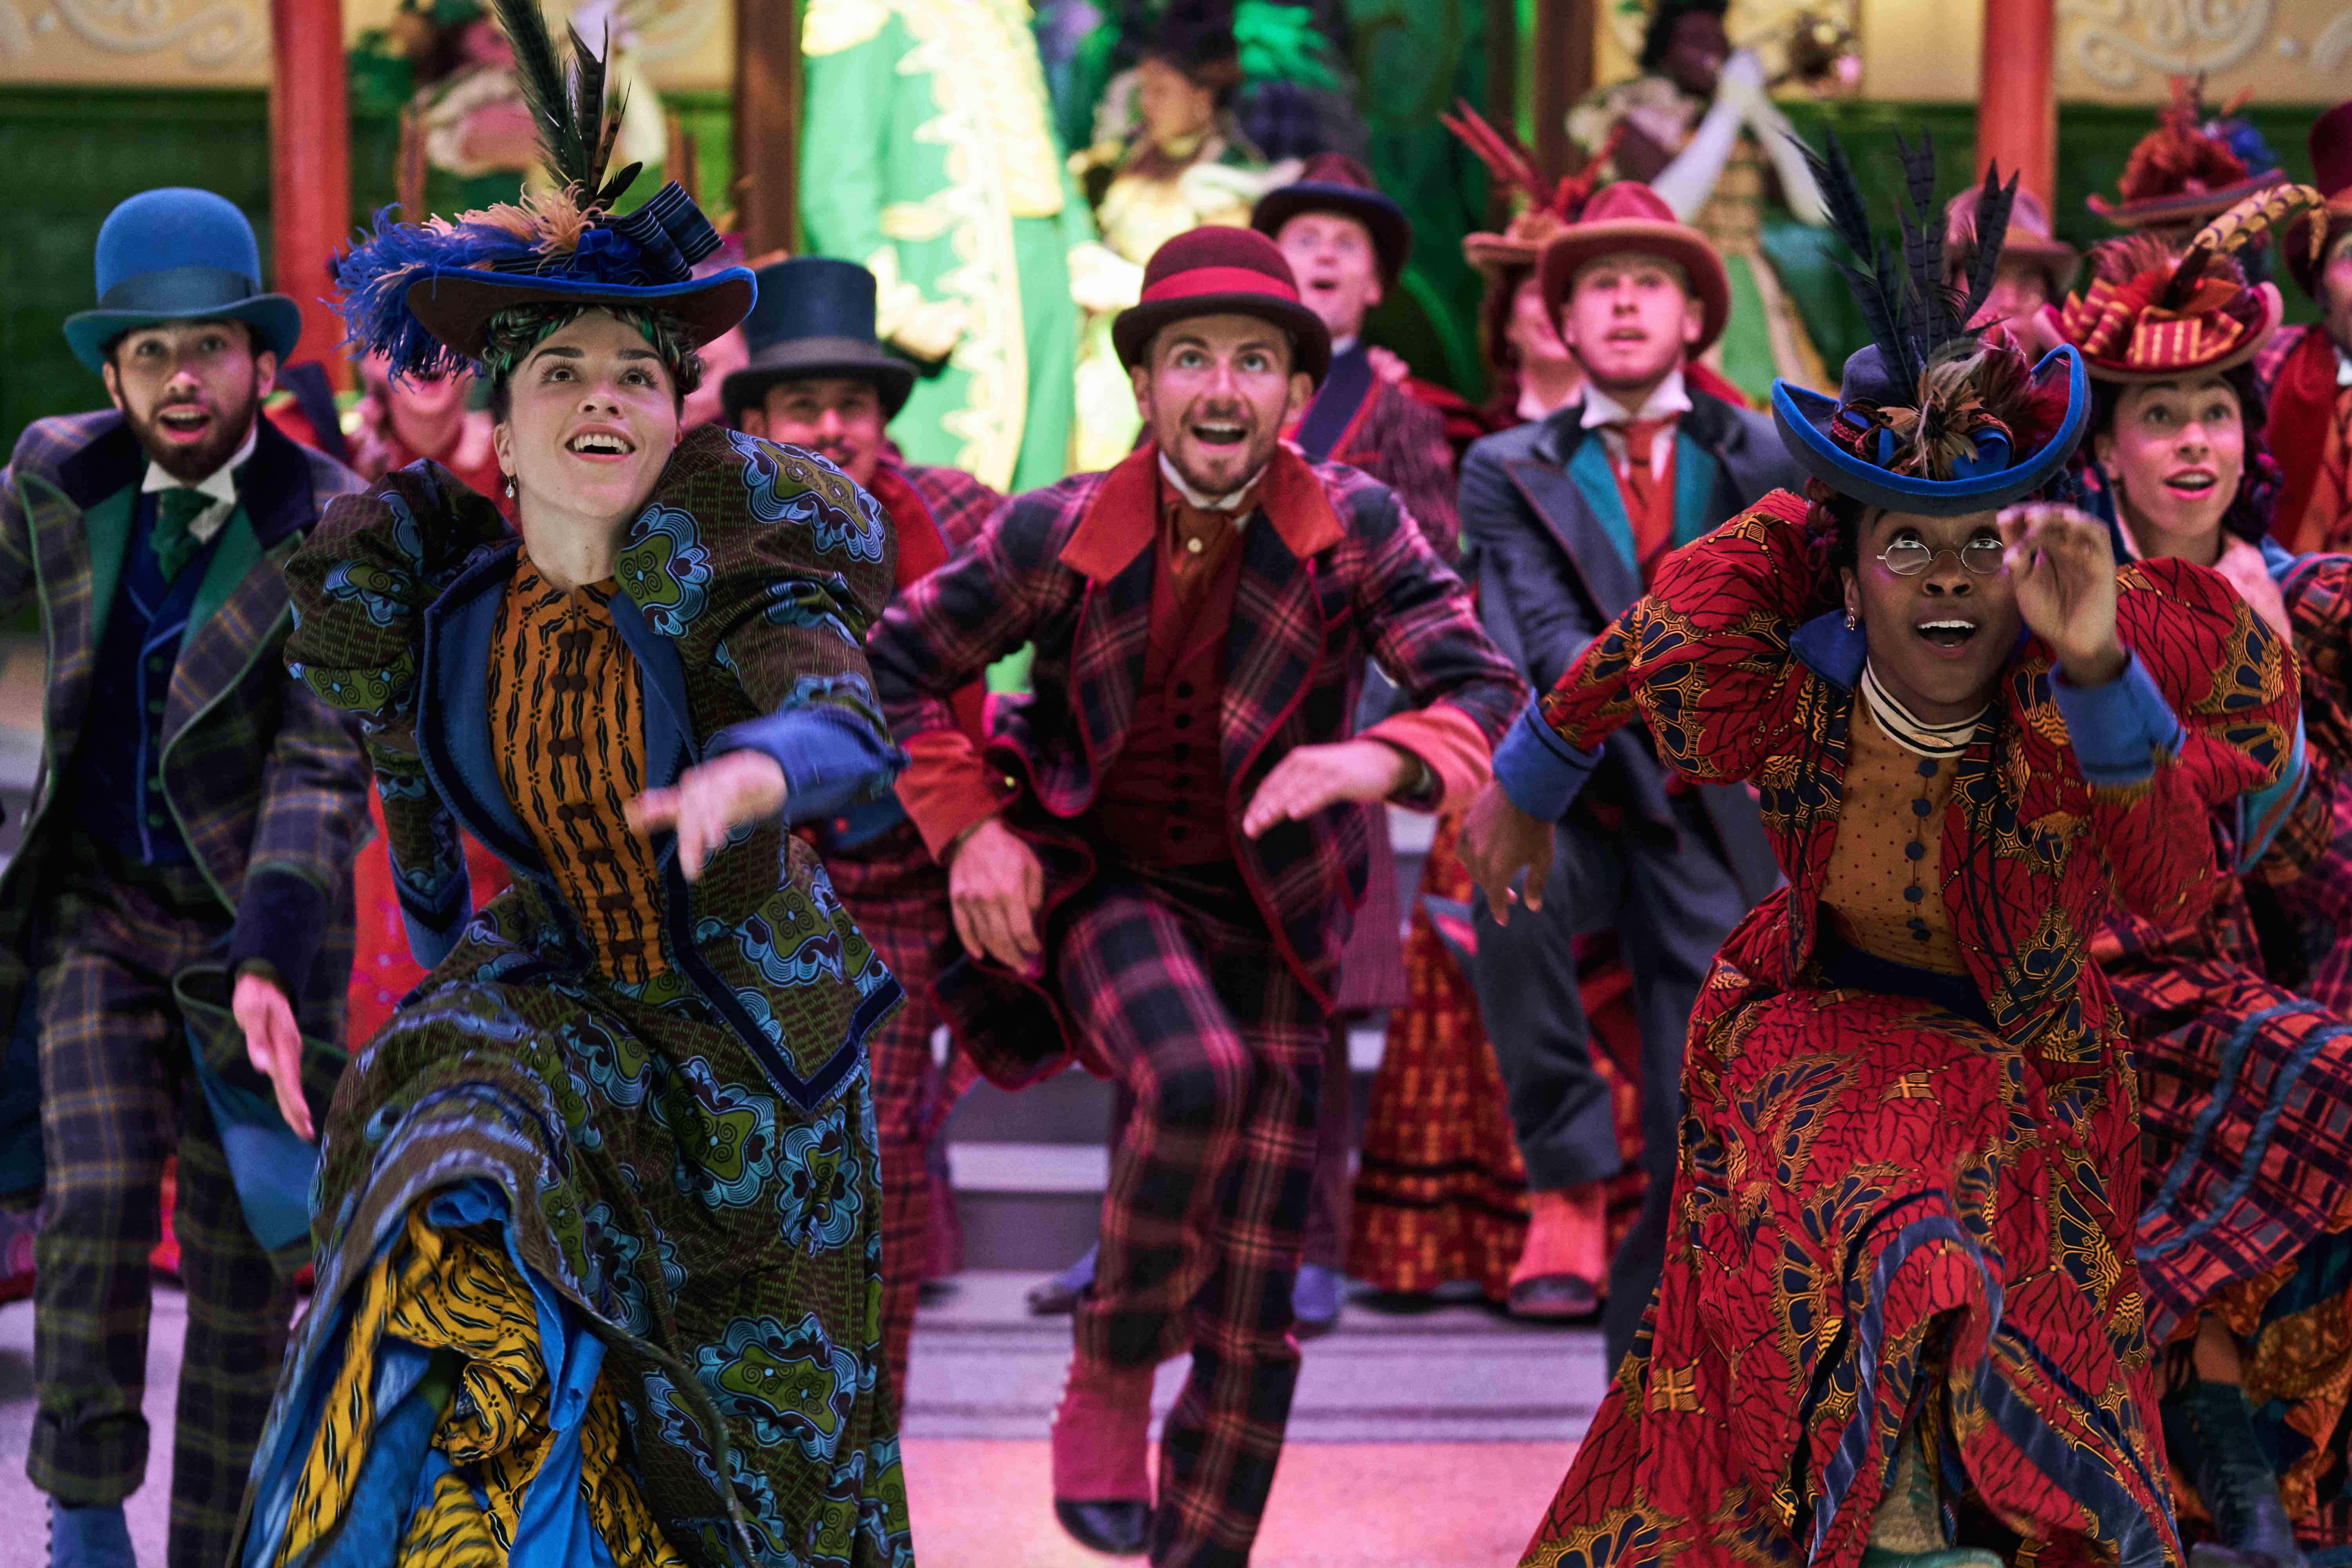 A group of people in brightly colored costumes dance.